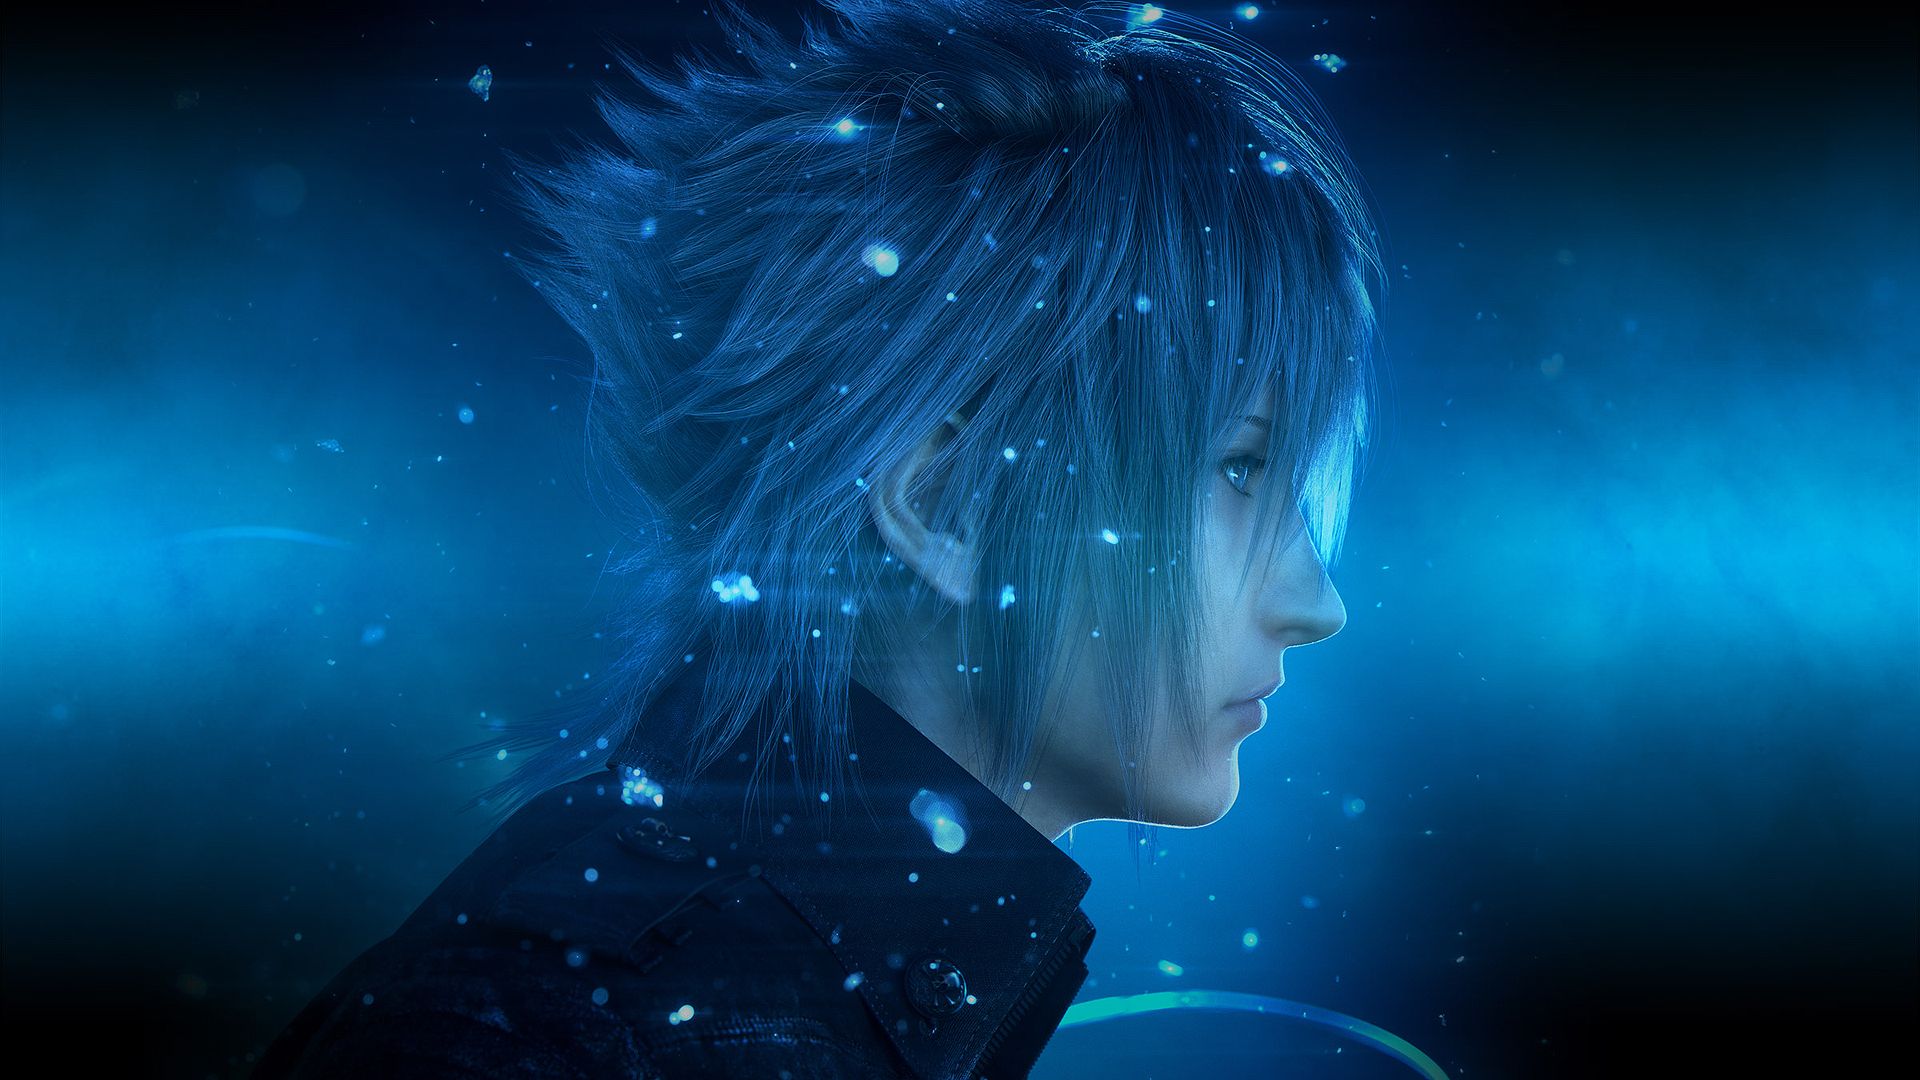 Growing Up with Final Fantasy XV